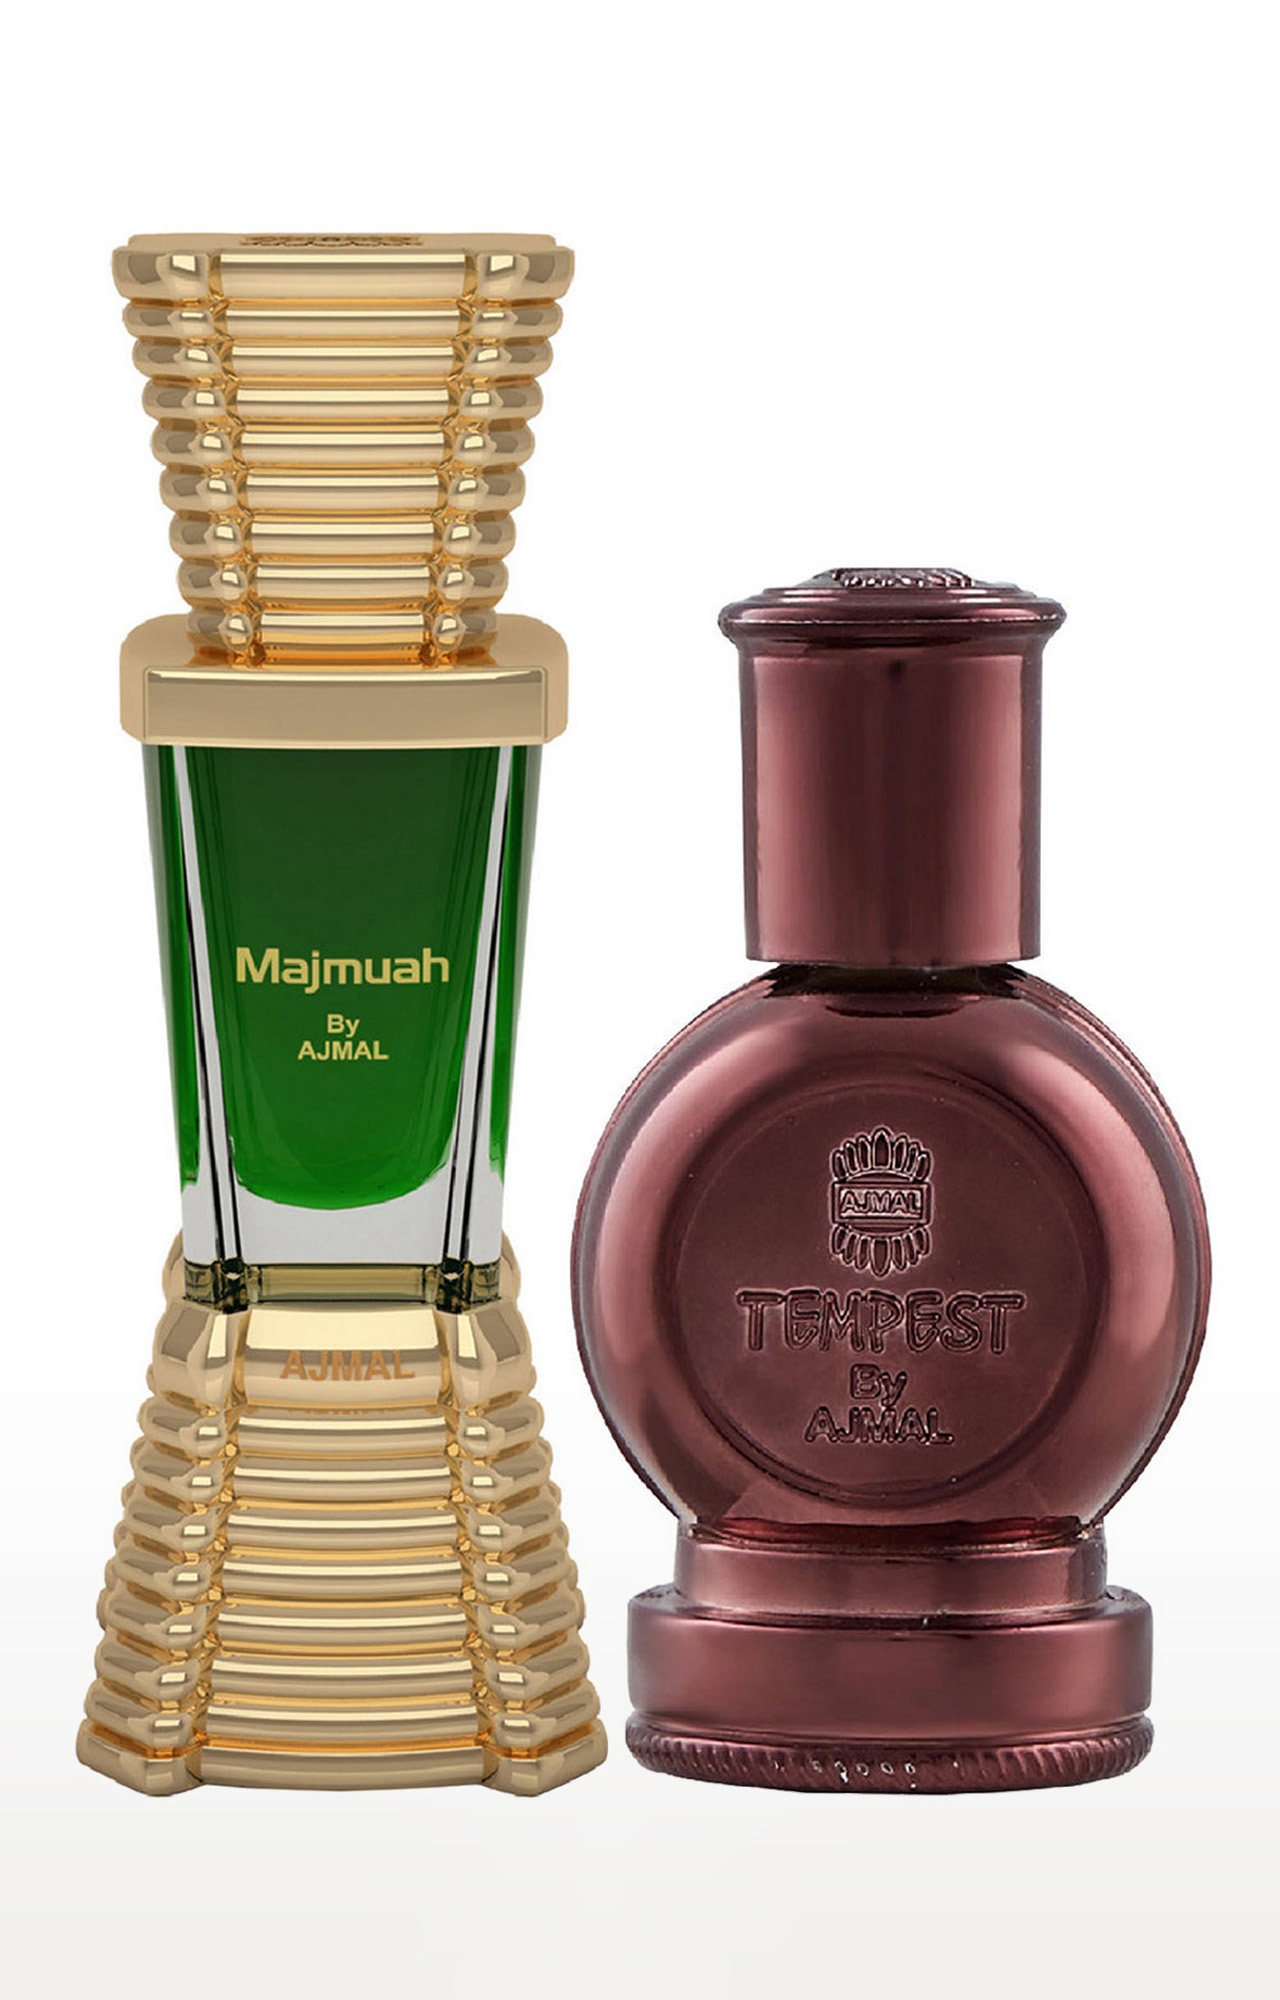 Ajmal Majmua Concentrated Perfume Oil Oriental Alcohol-free Attar 10ml for Unisex and Tempest Concentrated Perfume Oil Alcohol-free Attar 12ml for Unisex